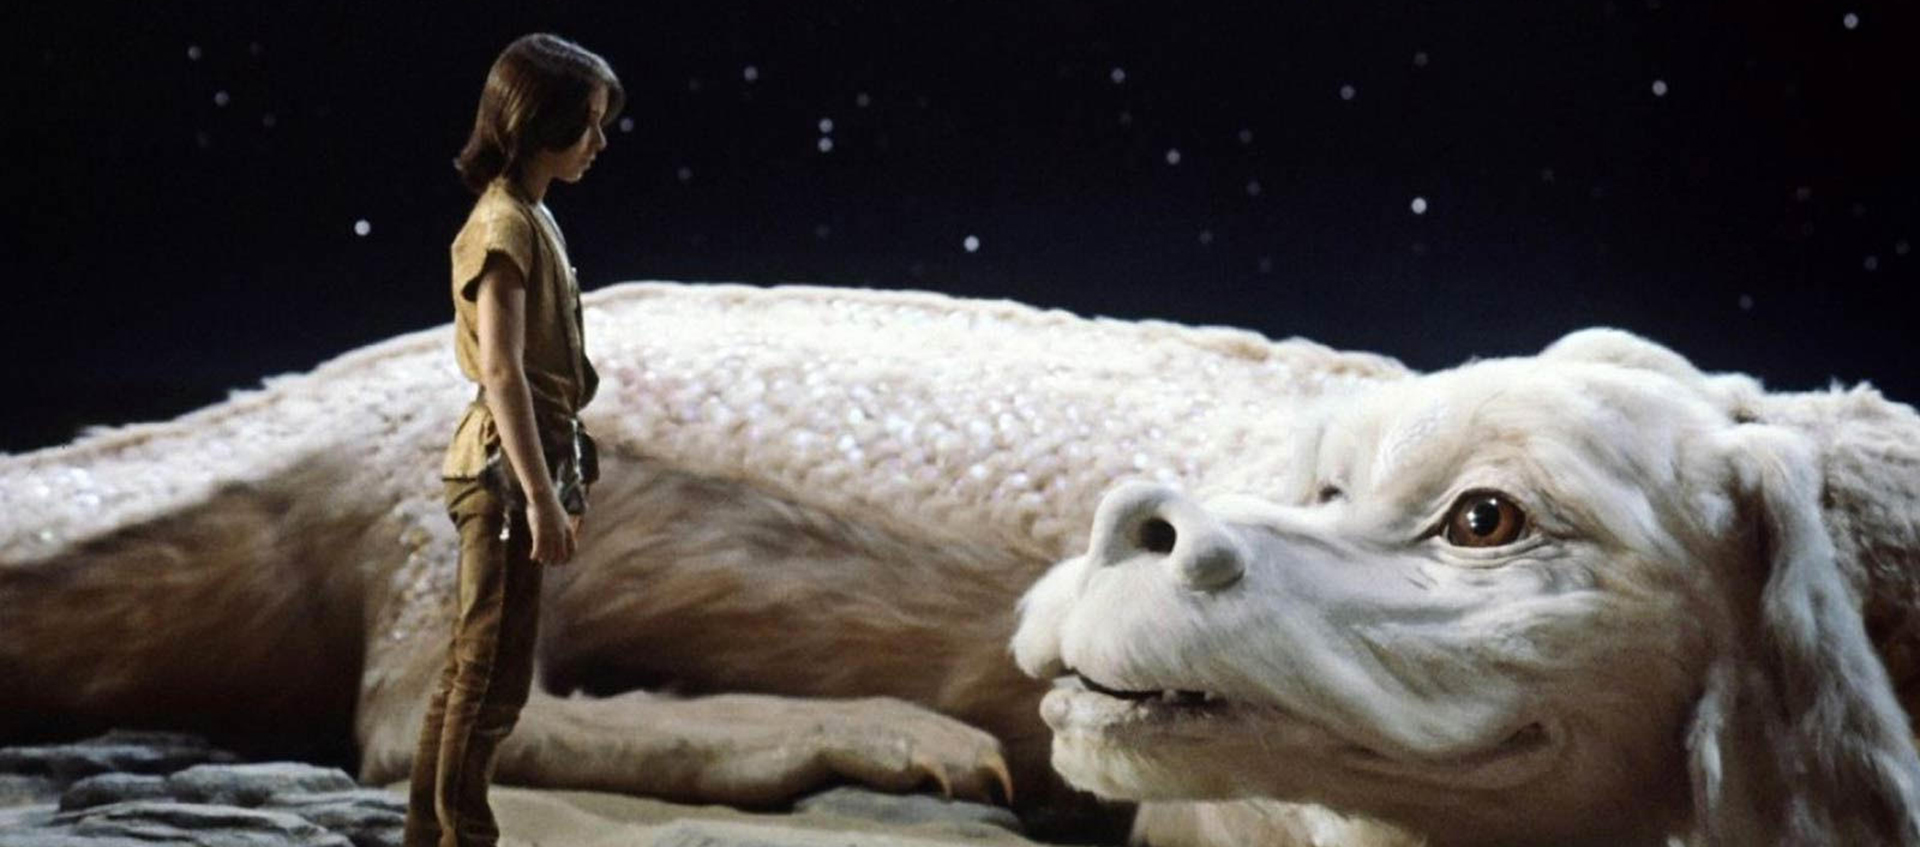 Under a starry sky, a young boy stands in front of a large, white mystical creature that resembles both a dragon and a shaggy dog. 